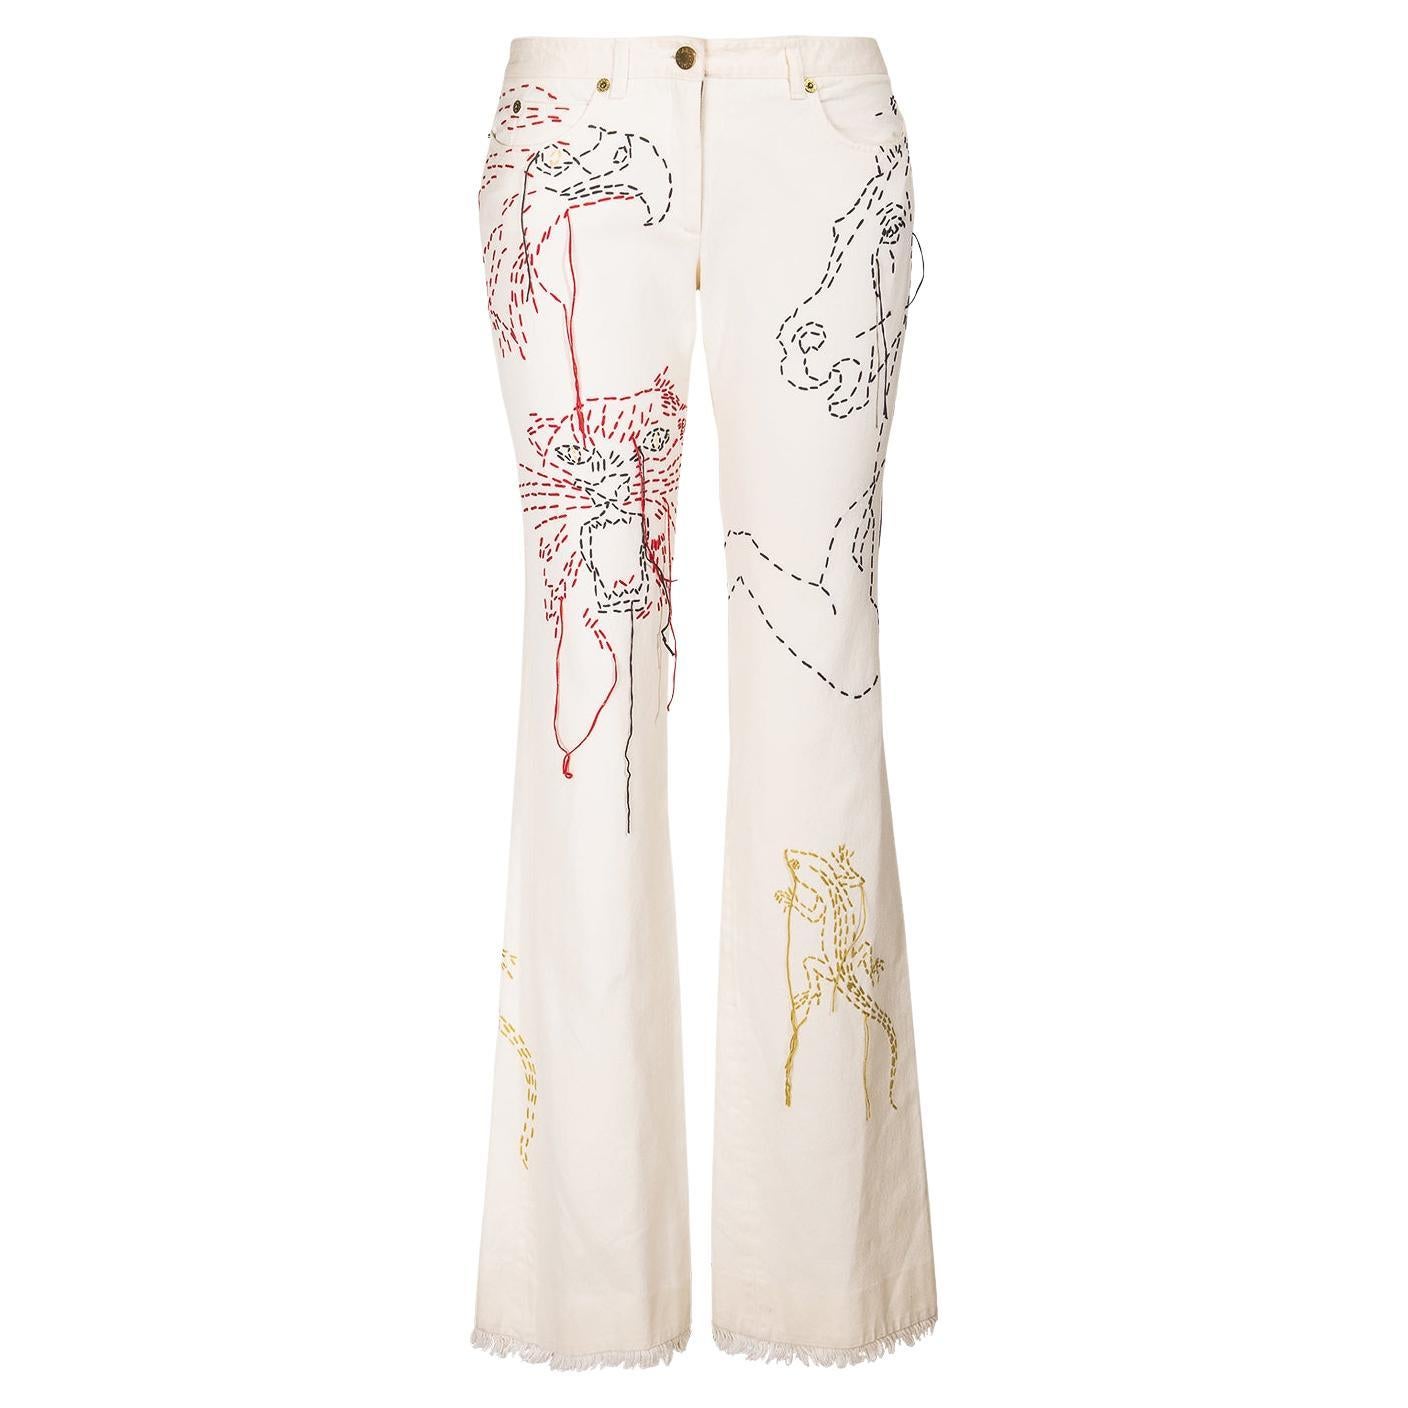 S/S 2000 Chloe by Stella McCartney Cream Jeans with Embroidered Animals